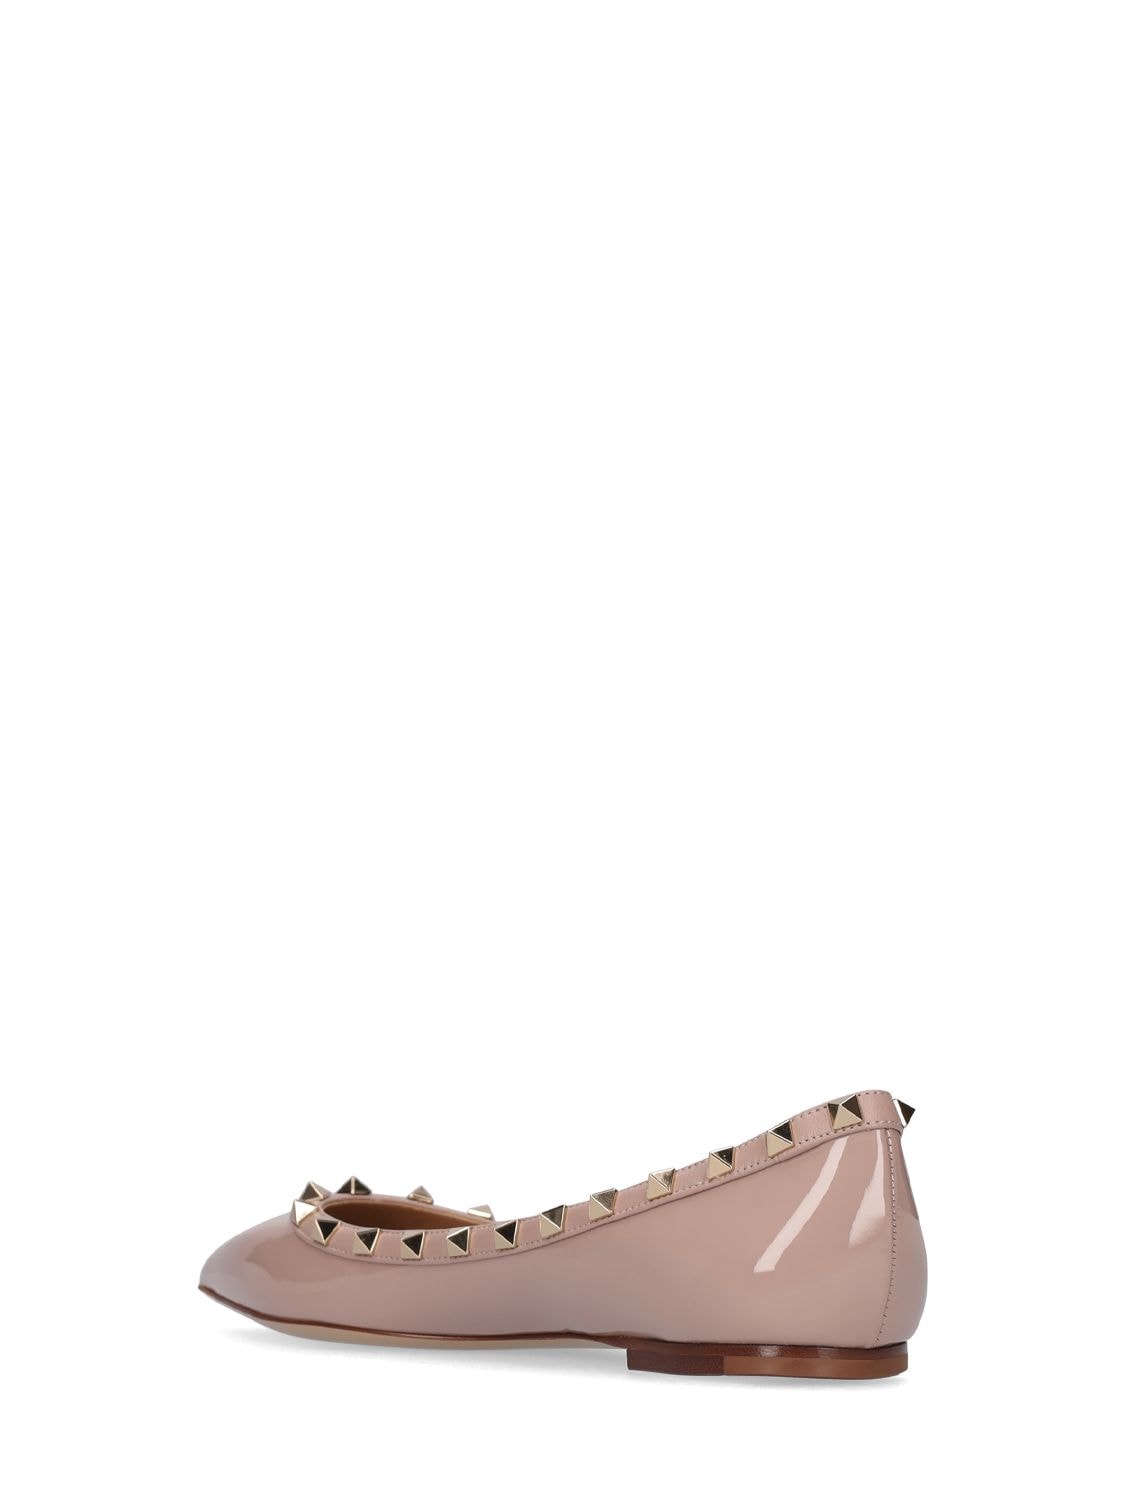 Shop Valentino 10mm Rockstud Patent Leather Flats In Poudre